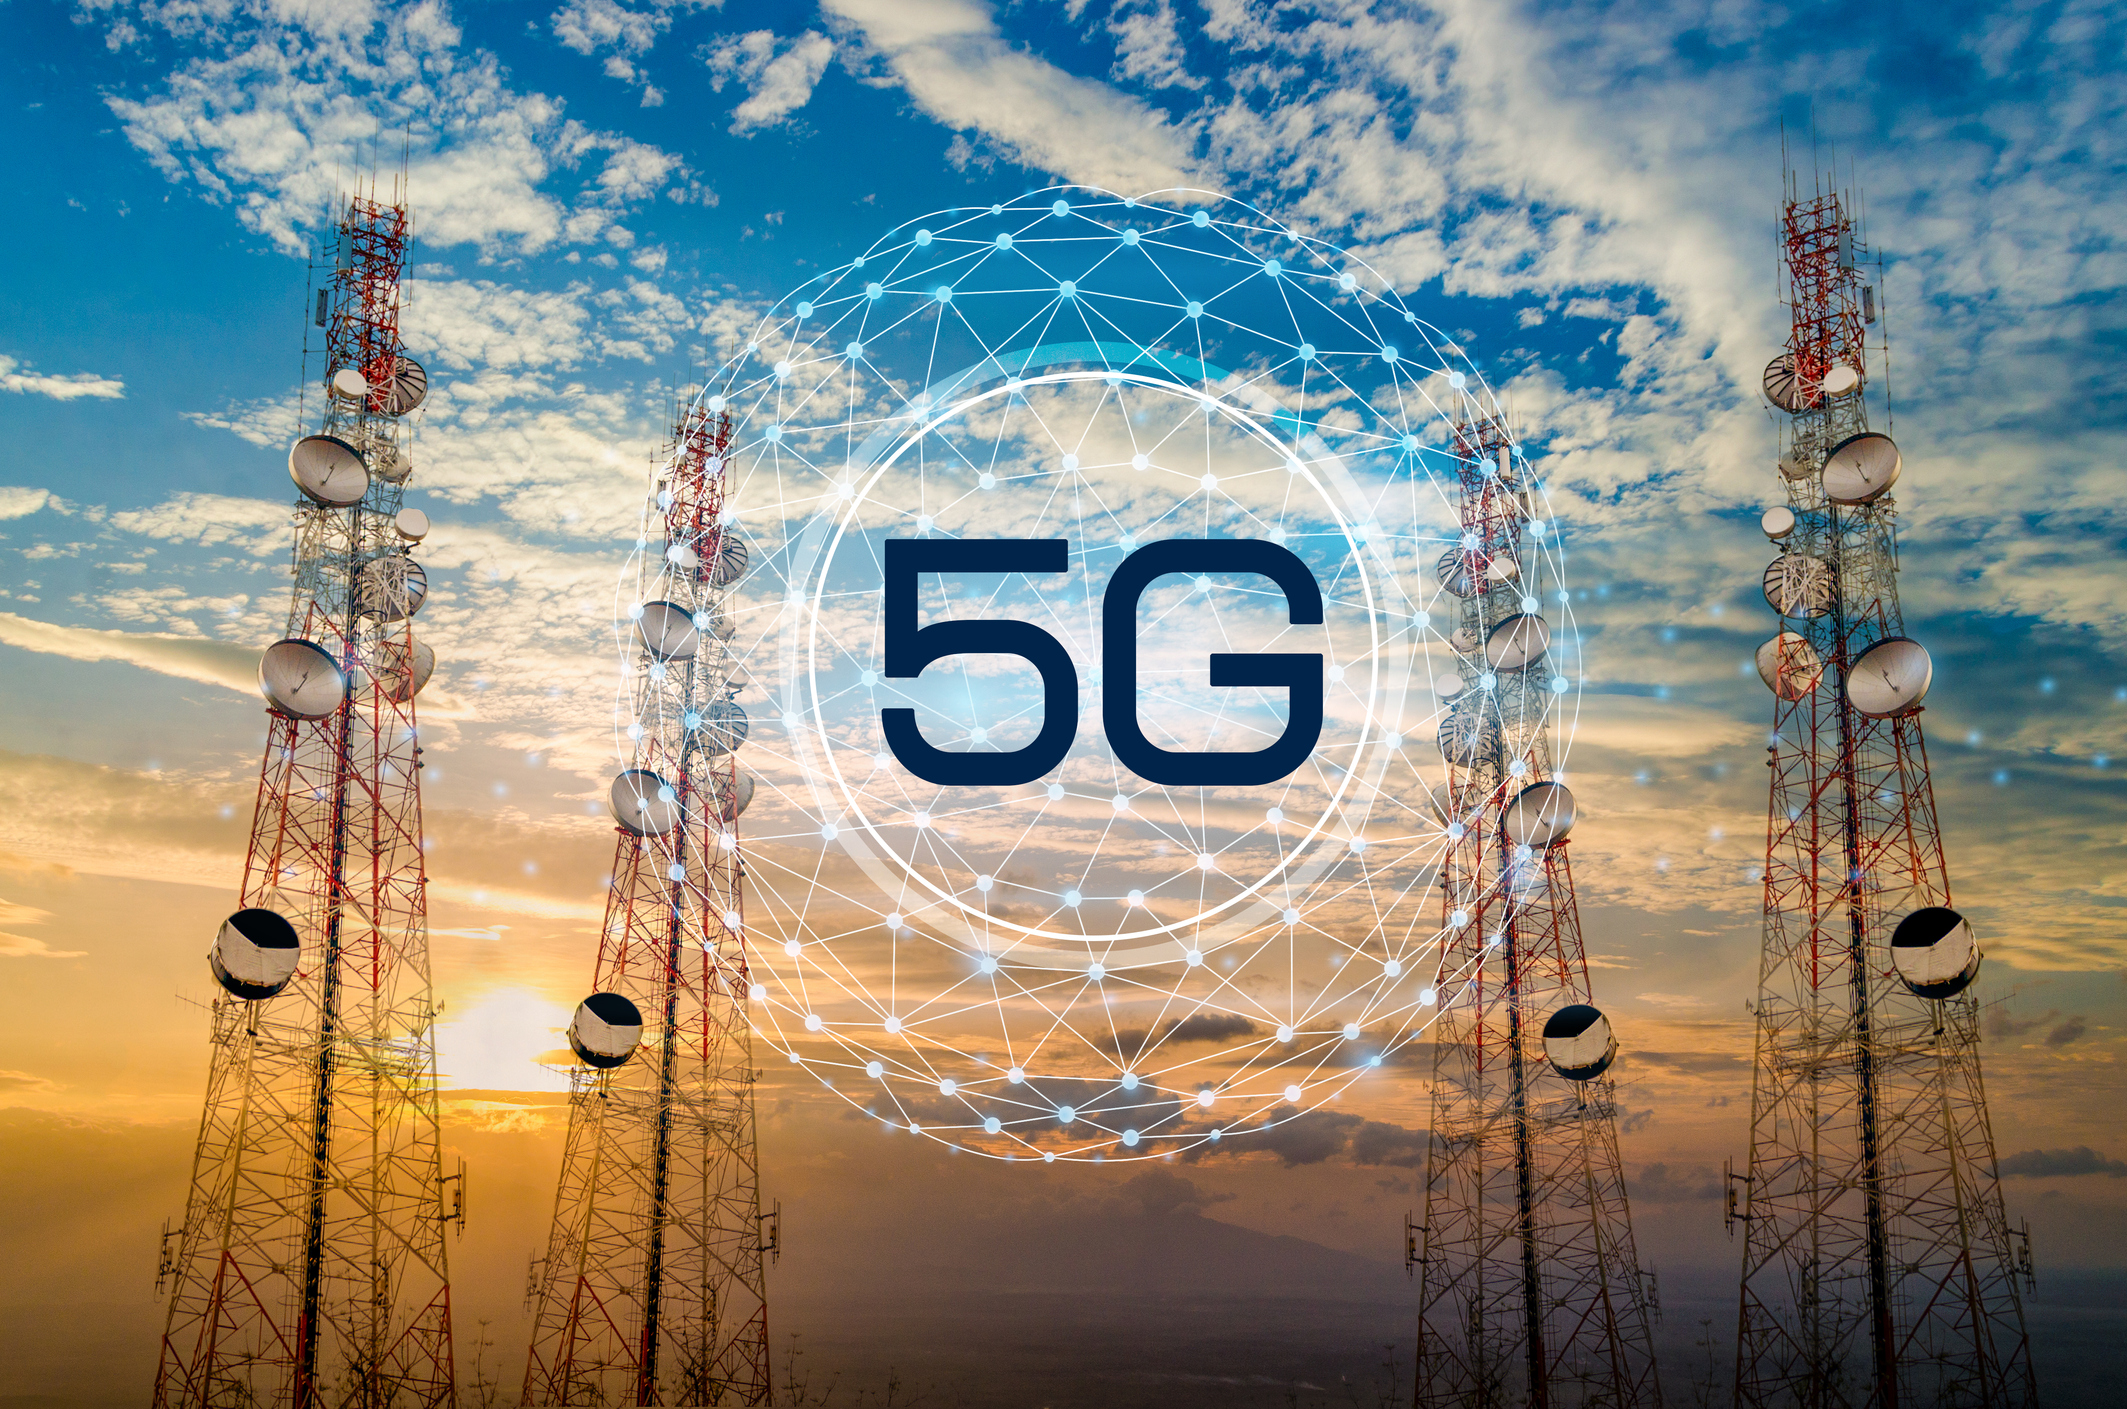 Future Of Networking Is 5G - Complete Controller